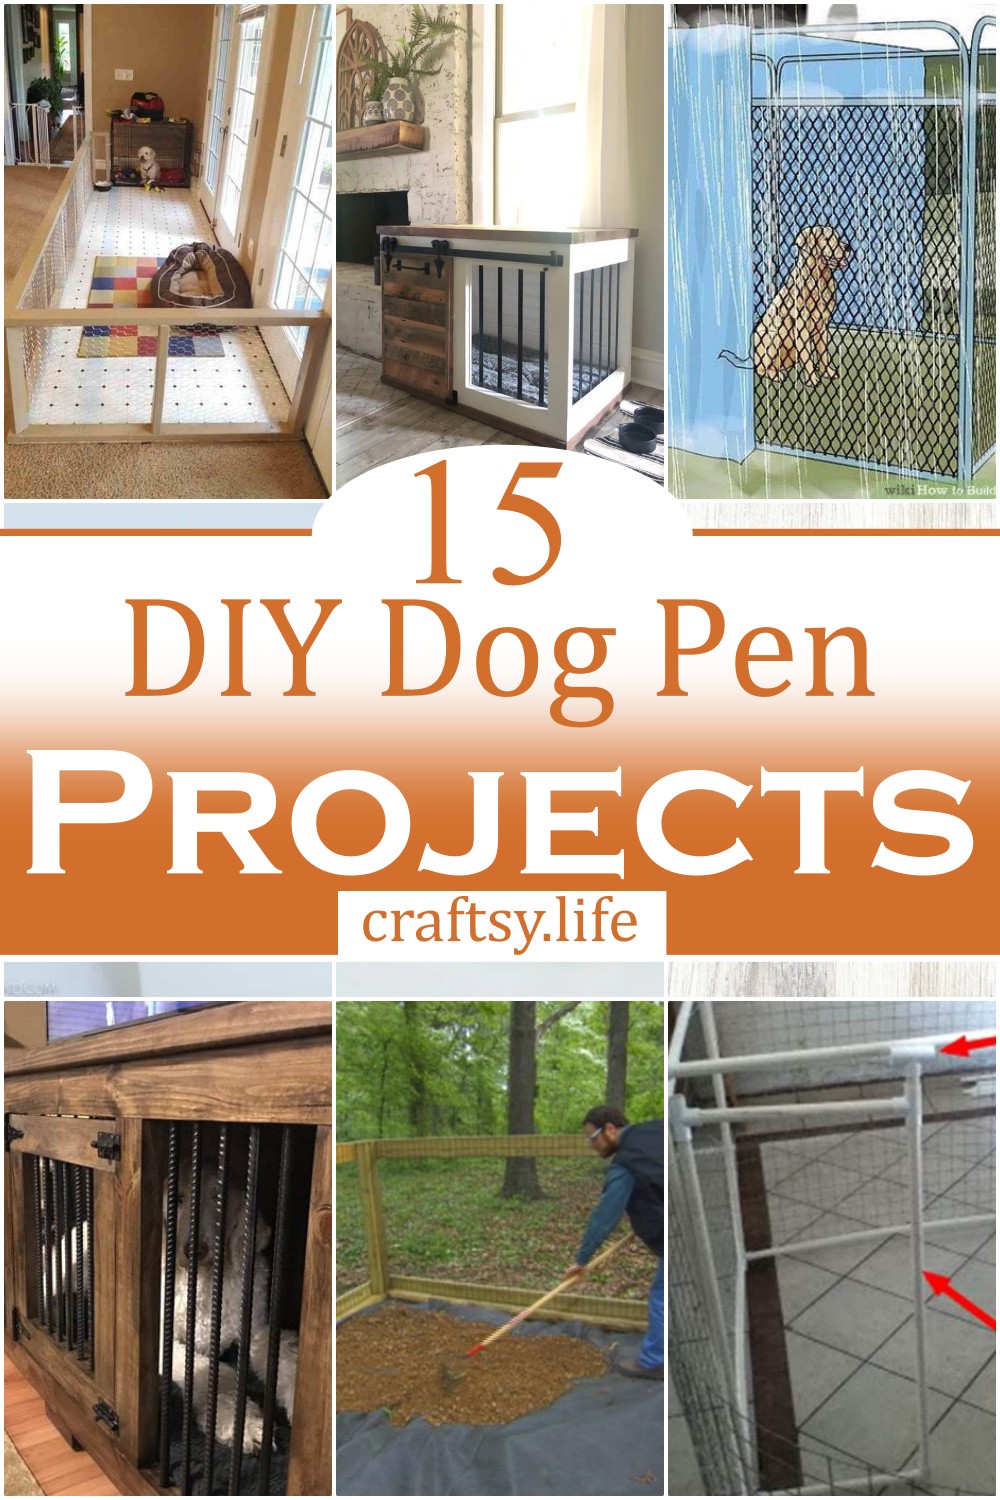 DIY Dog Pen Projects